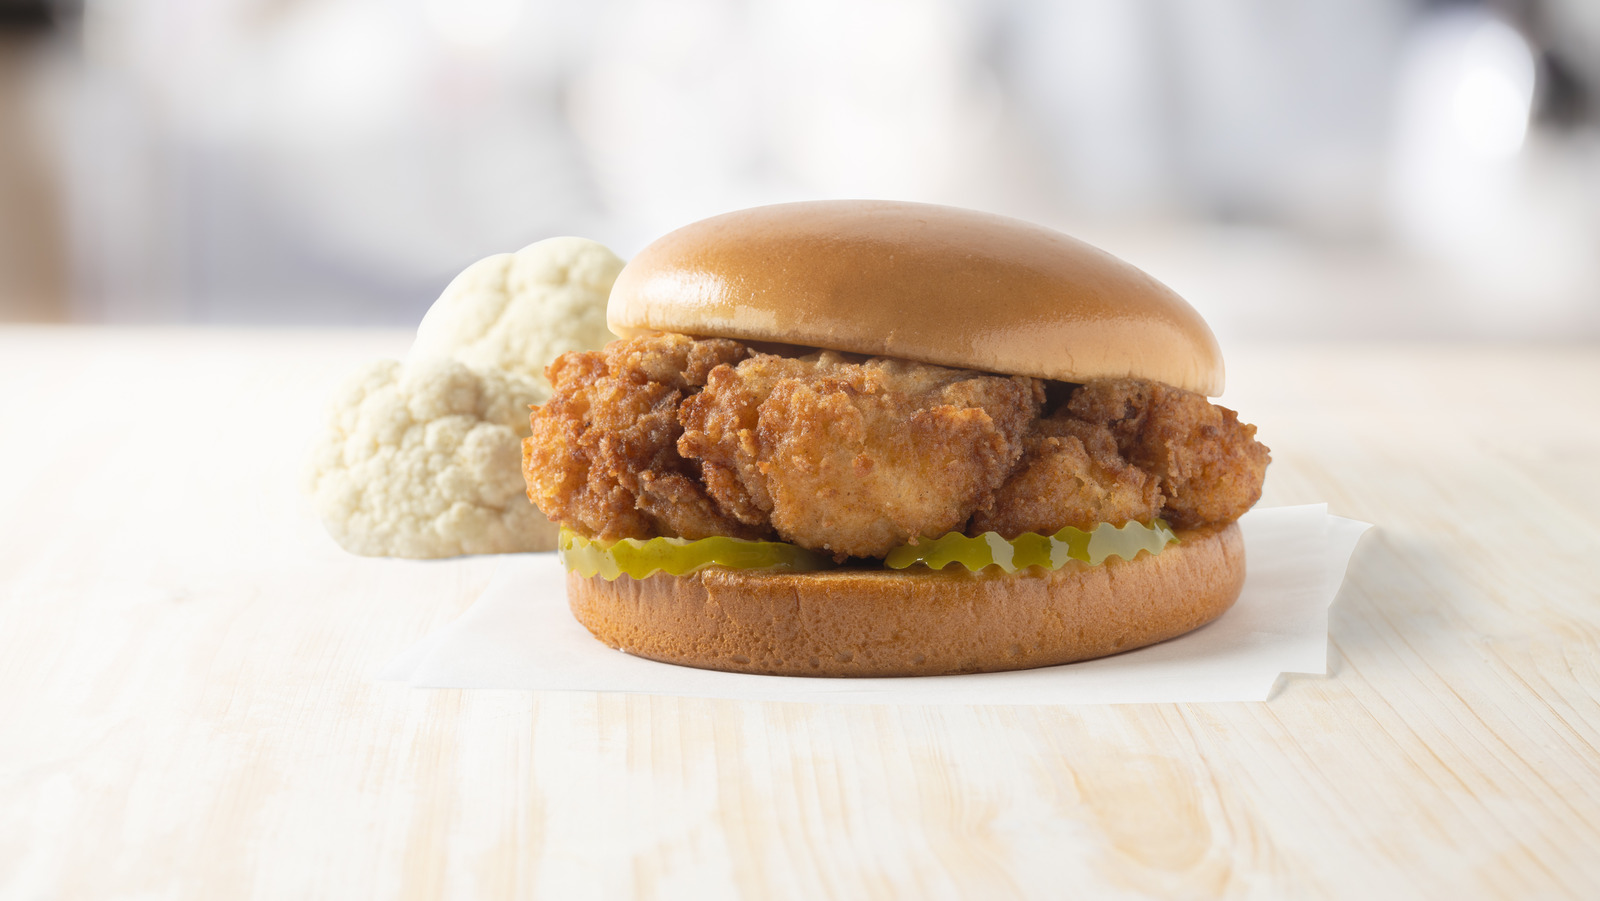 ChickFilA Is Rolling Out An Unexpected New Item. Here's What We Know